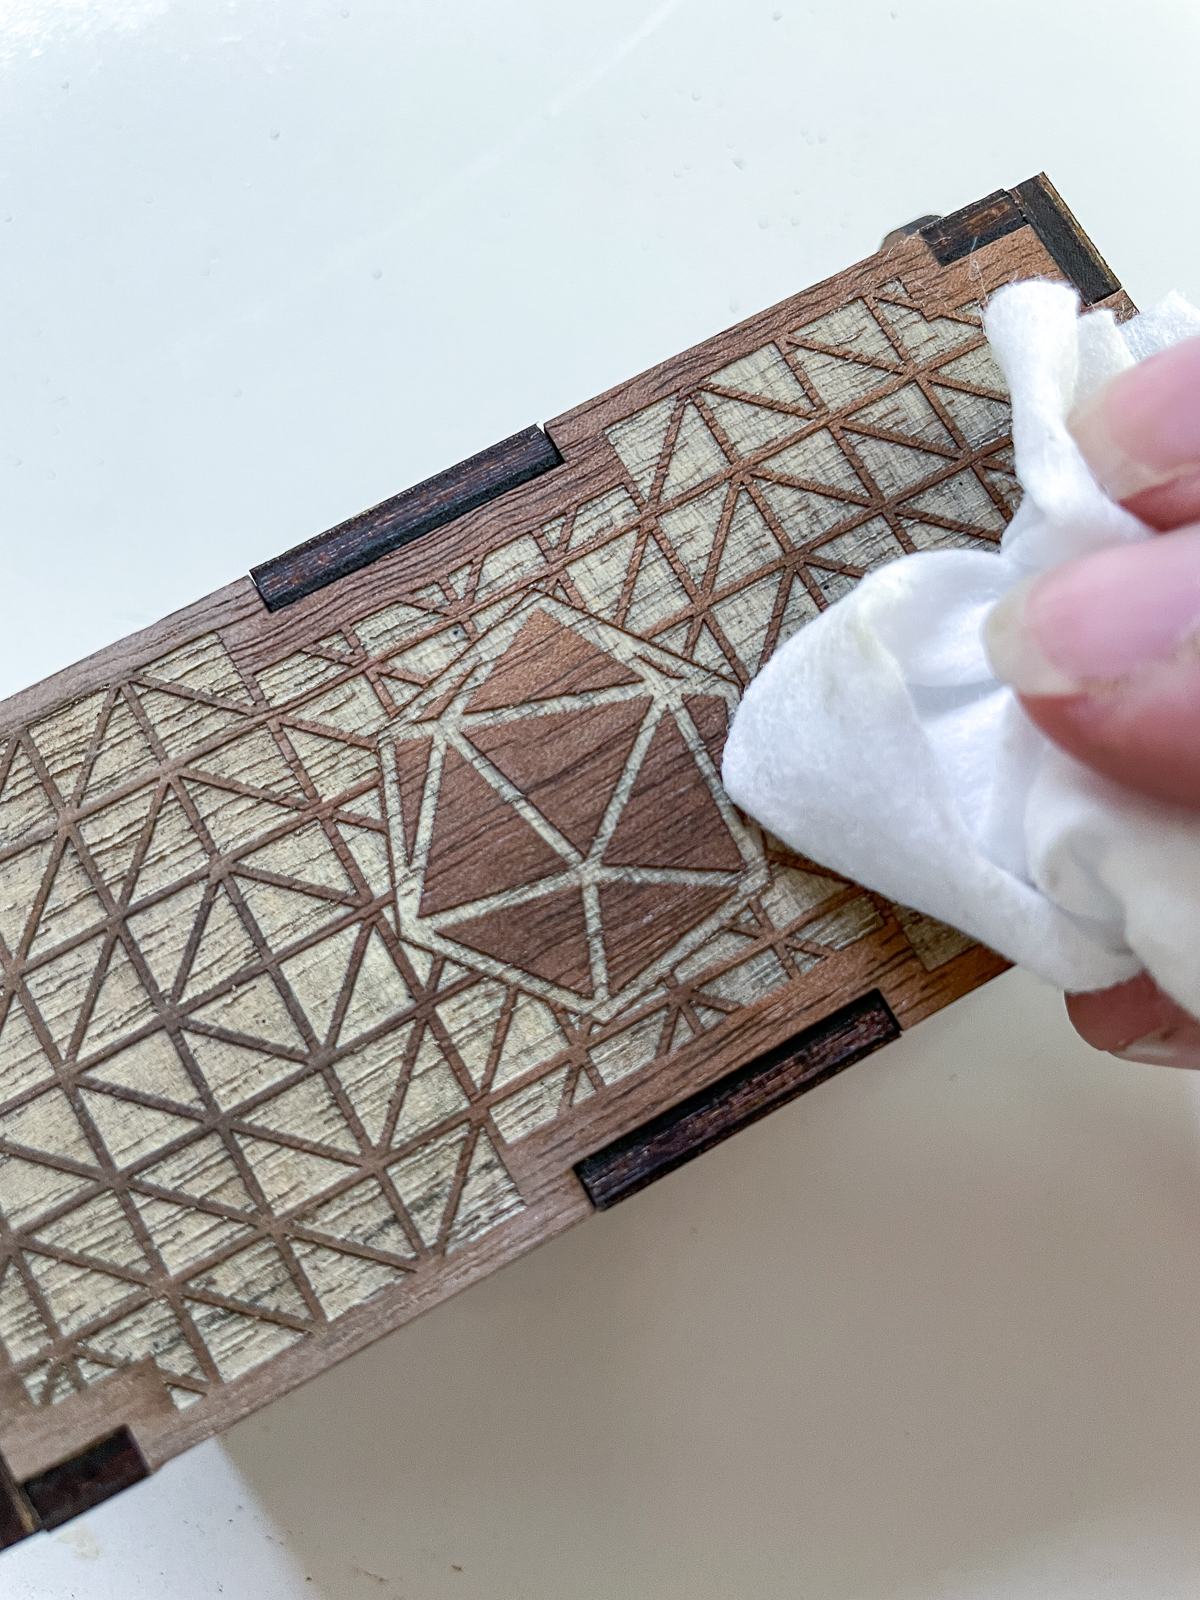 cleaning the surface of the engraved dice box with a baby wipe